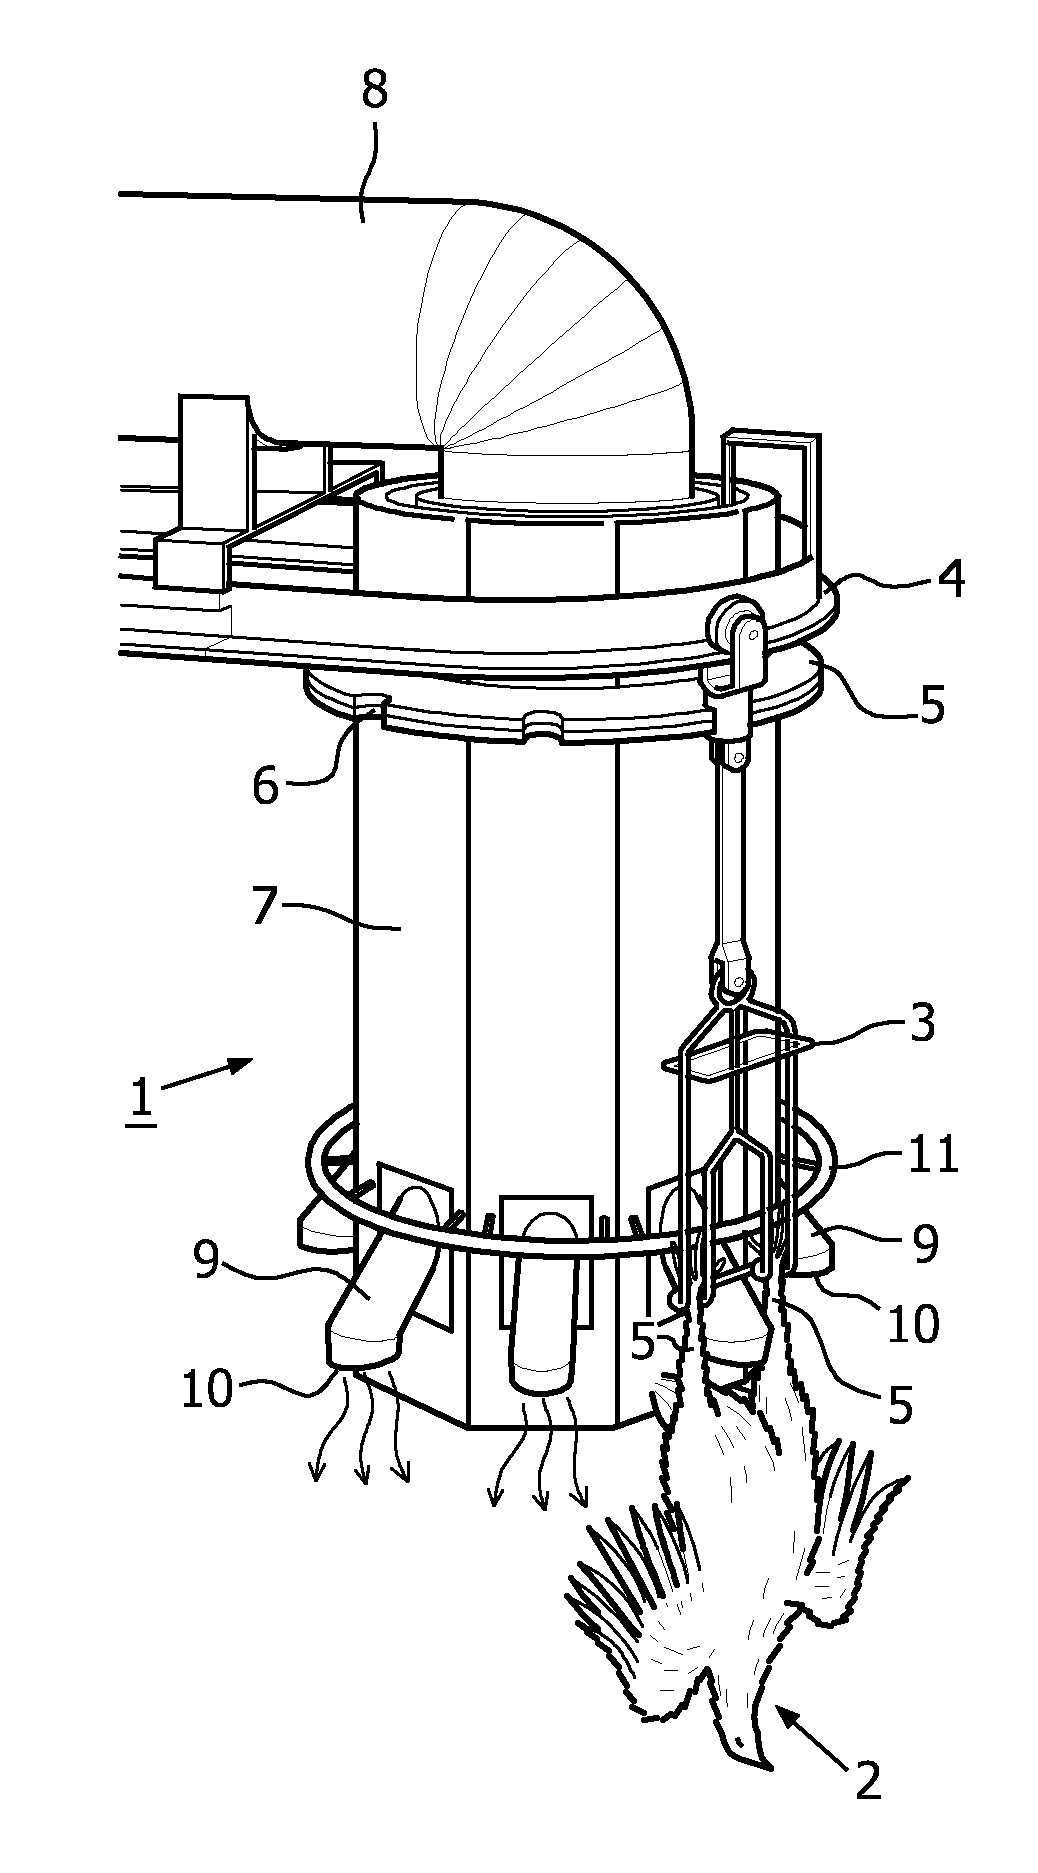 Device and method for scalding different parts of a poultry carcass with varying intensities